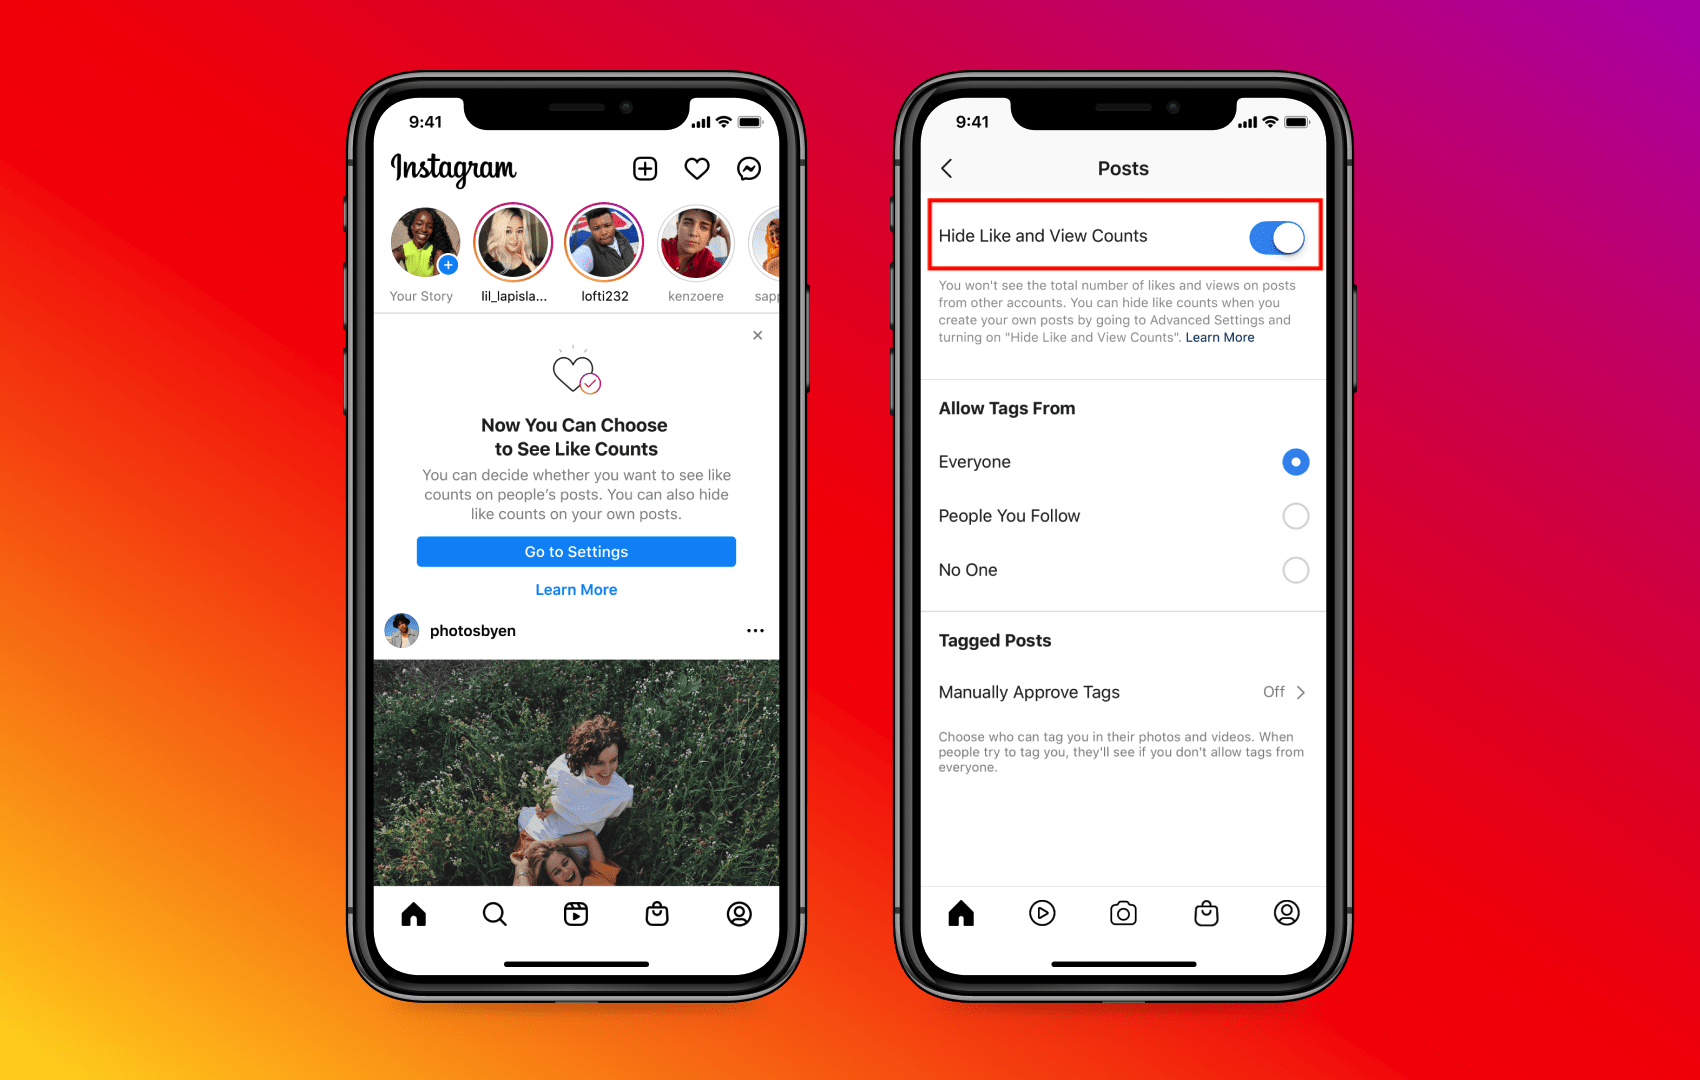 Instagram, Facebook Will Now Let You Hide ‘Like' Counts on Posts